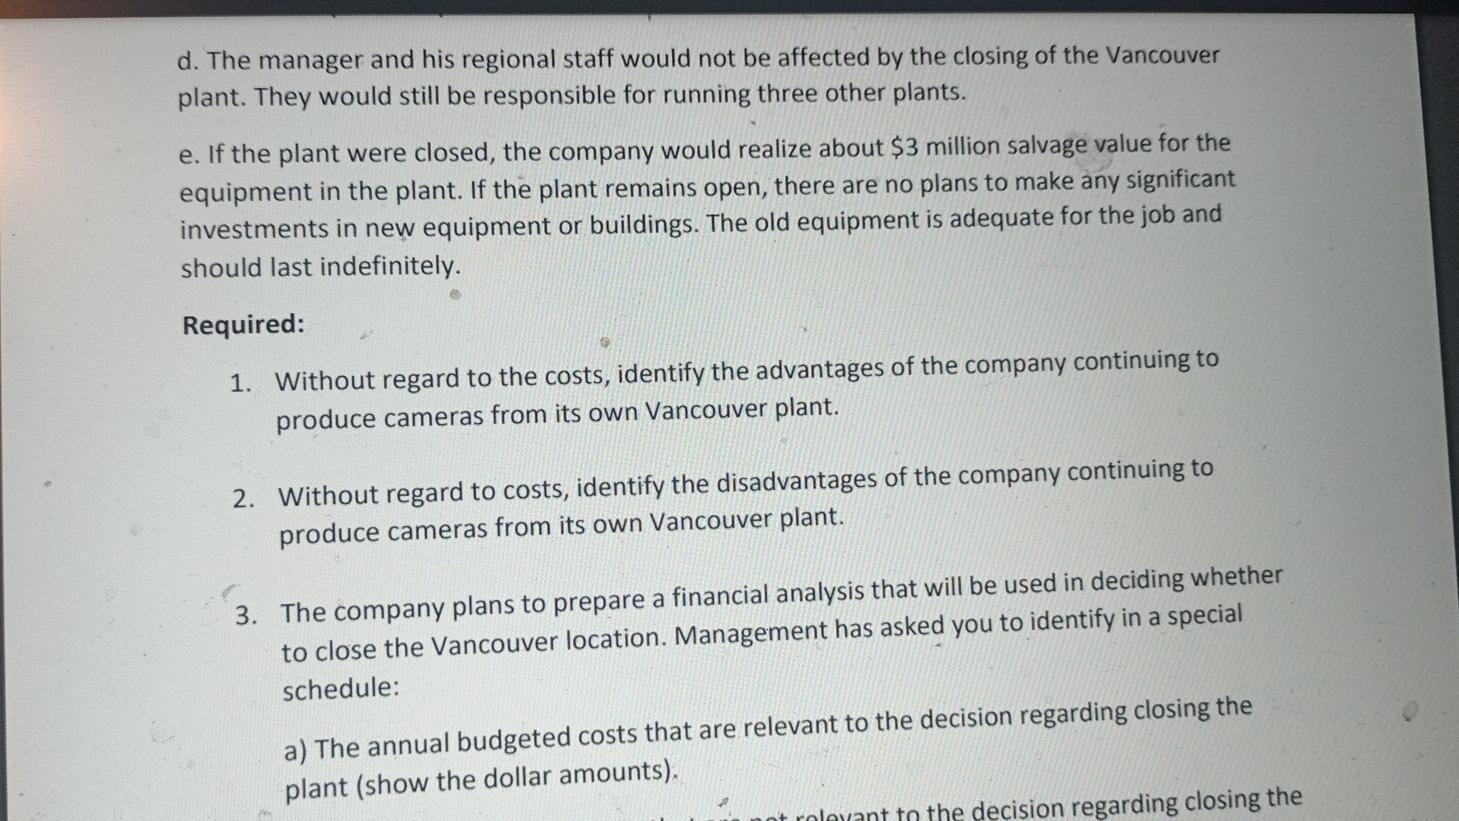 d. The manager and his regional staff would not be affected by the closing of the Vancouverplant. They would still be respon